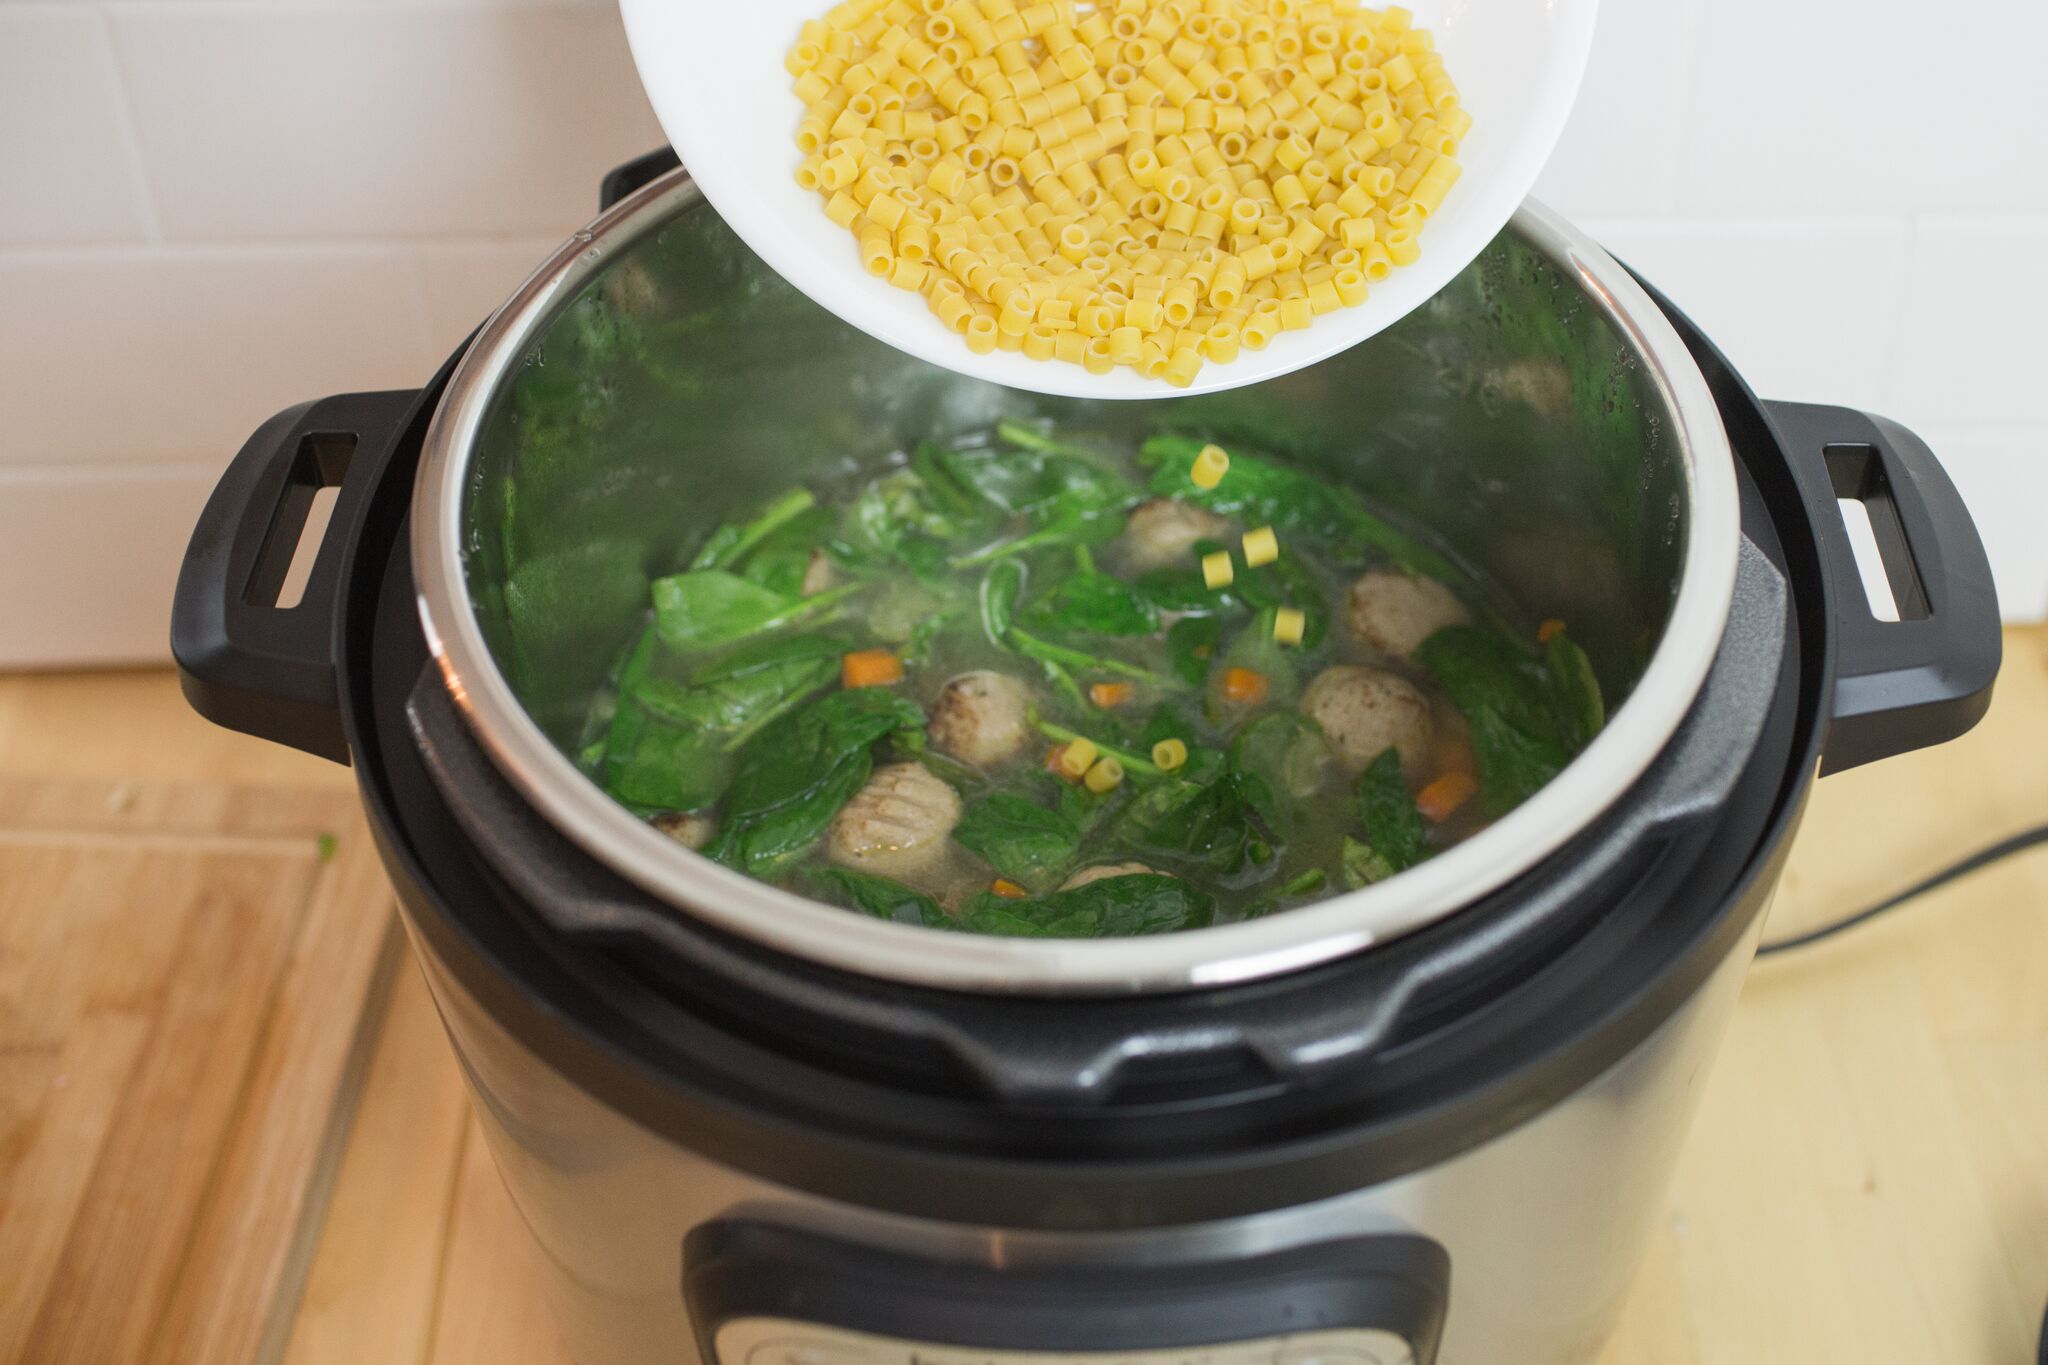 Once the time is ready, remove Instant Pot lid and add in pasta and spinach.